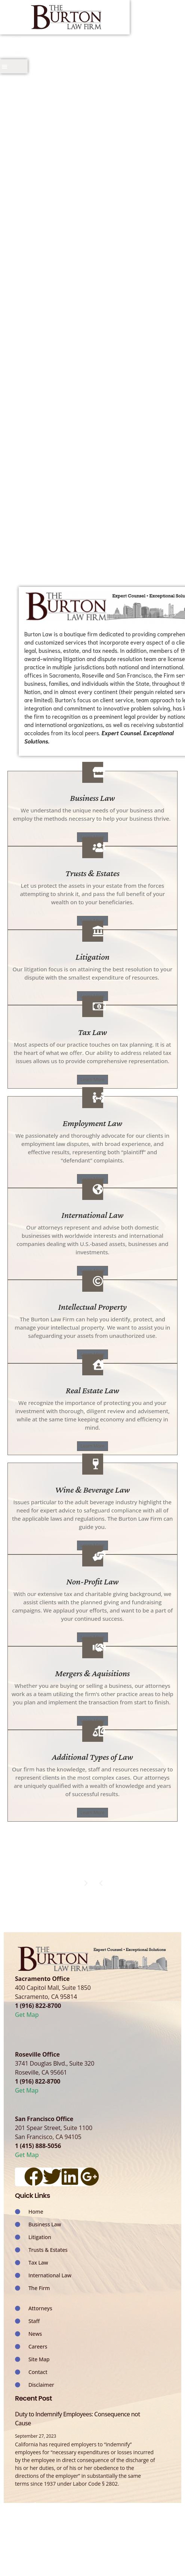 The Burton Law Firm - Roseville CA Lawyers